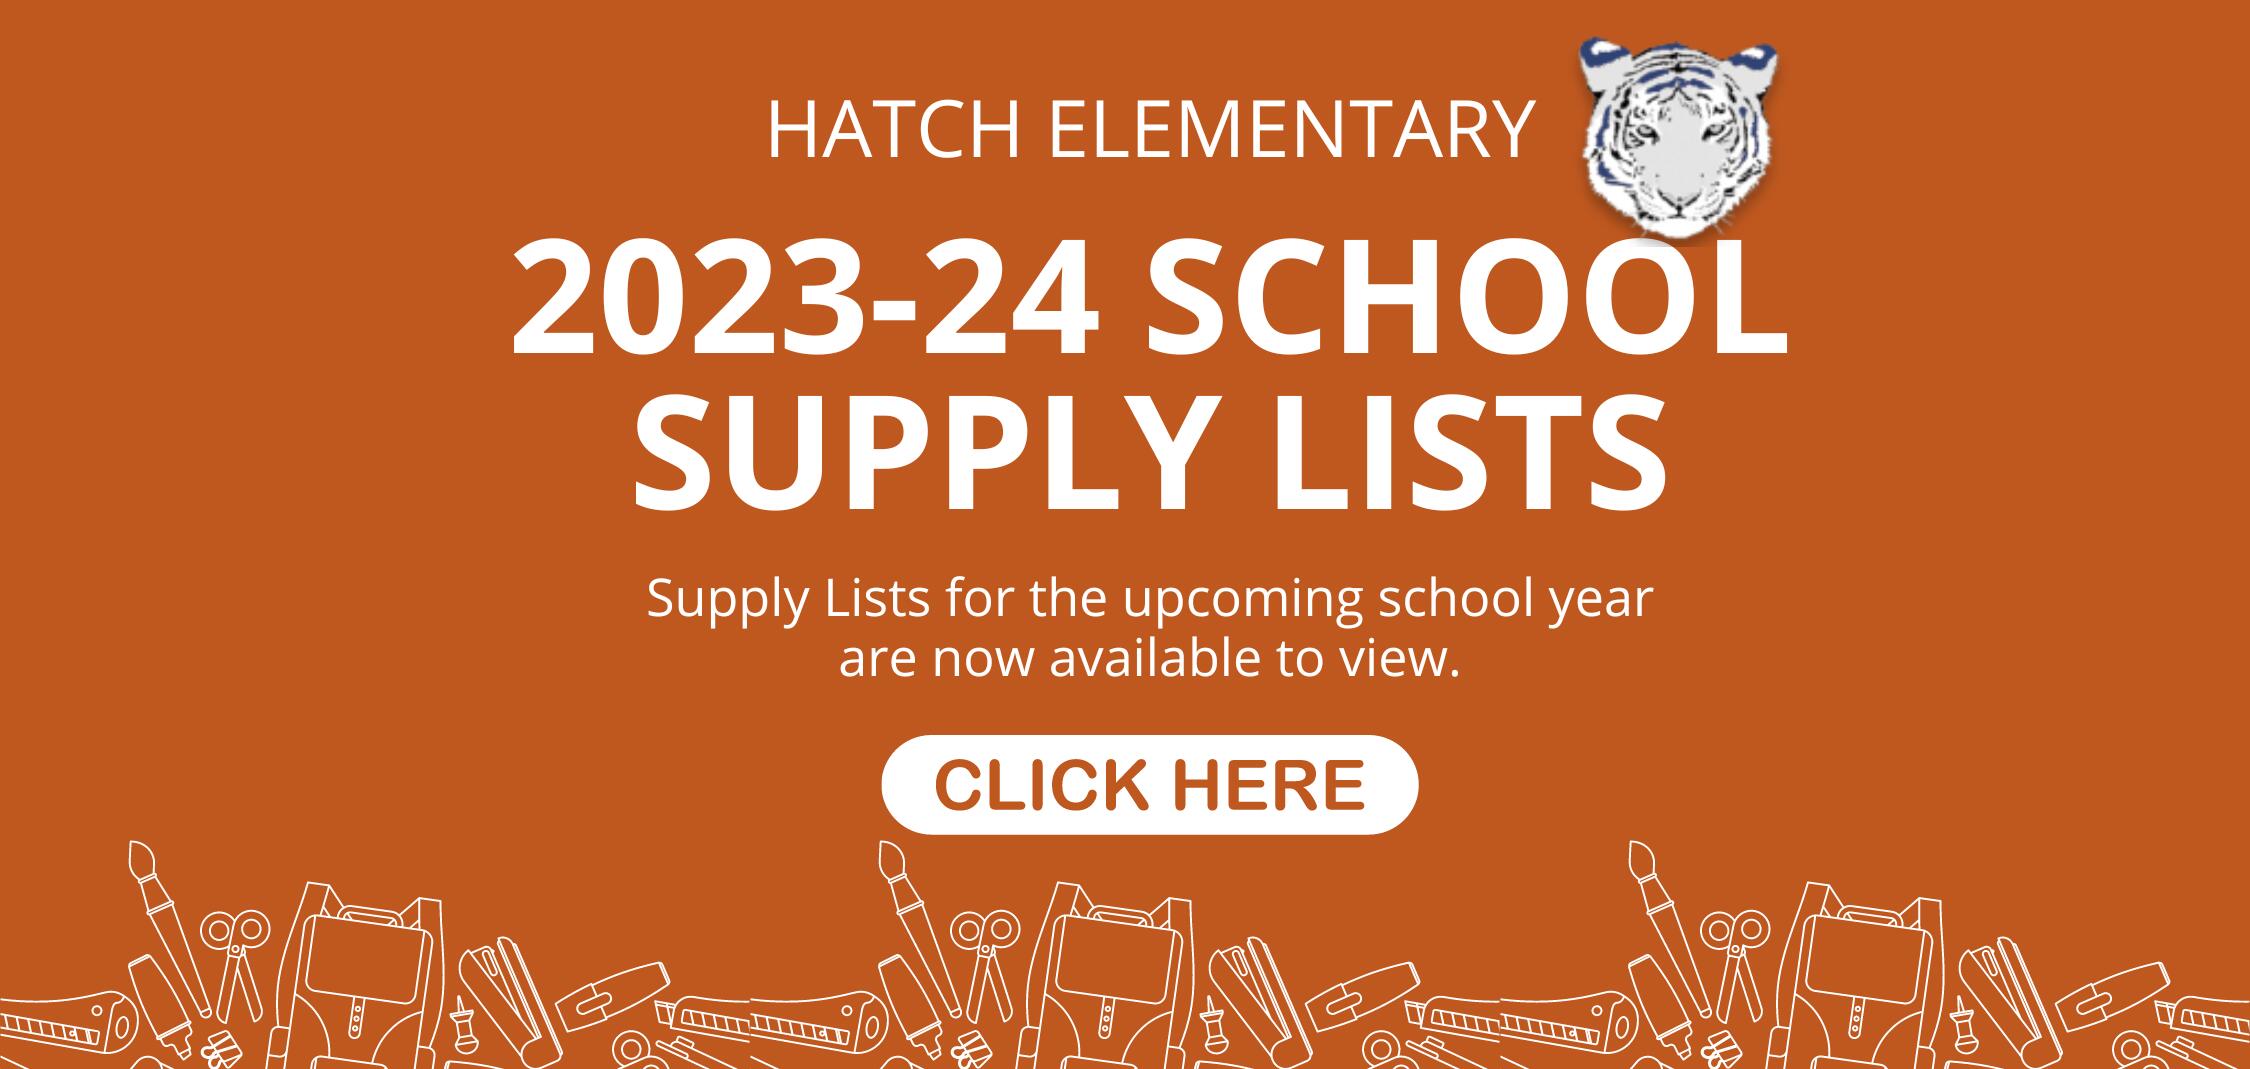 Click here to view the 2023-24 school supply lists!